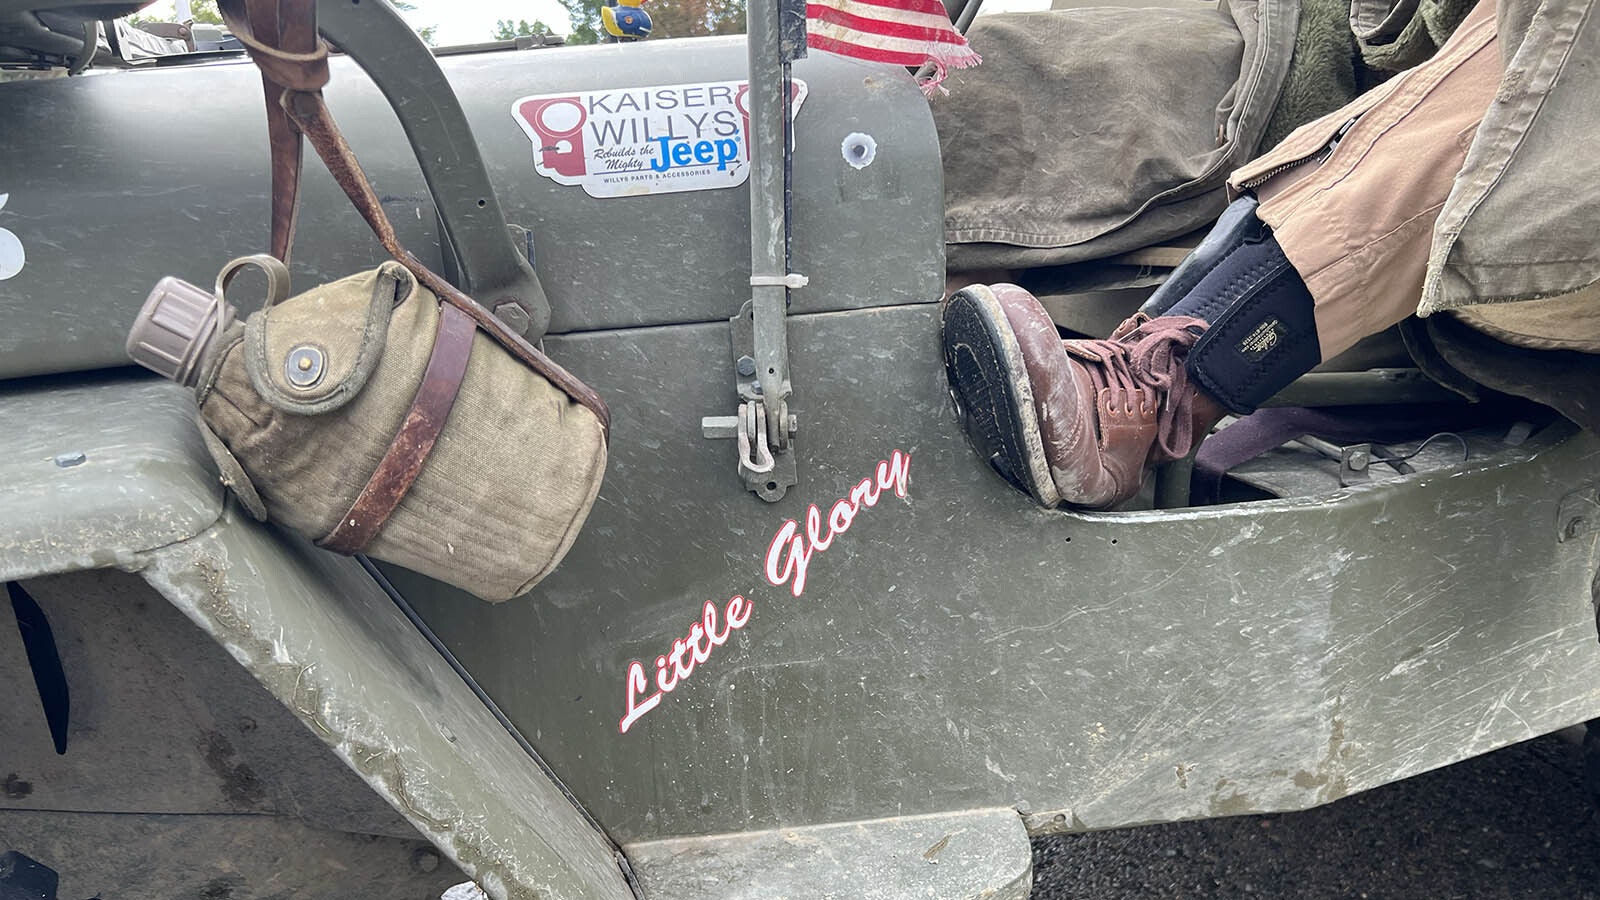 The Jeep has a name: "Little Glory."